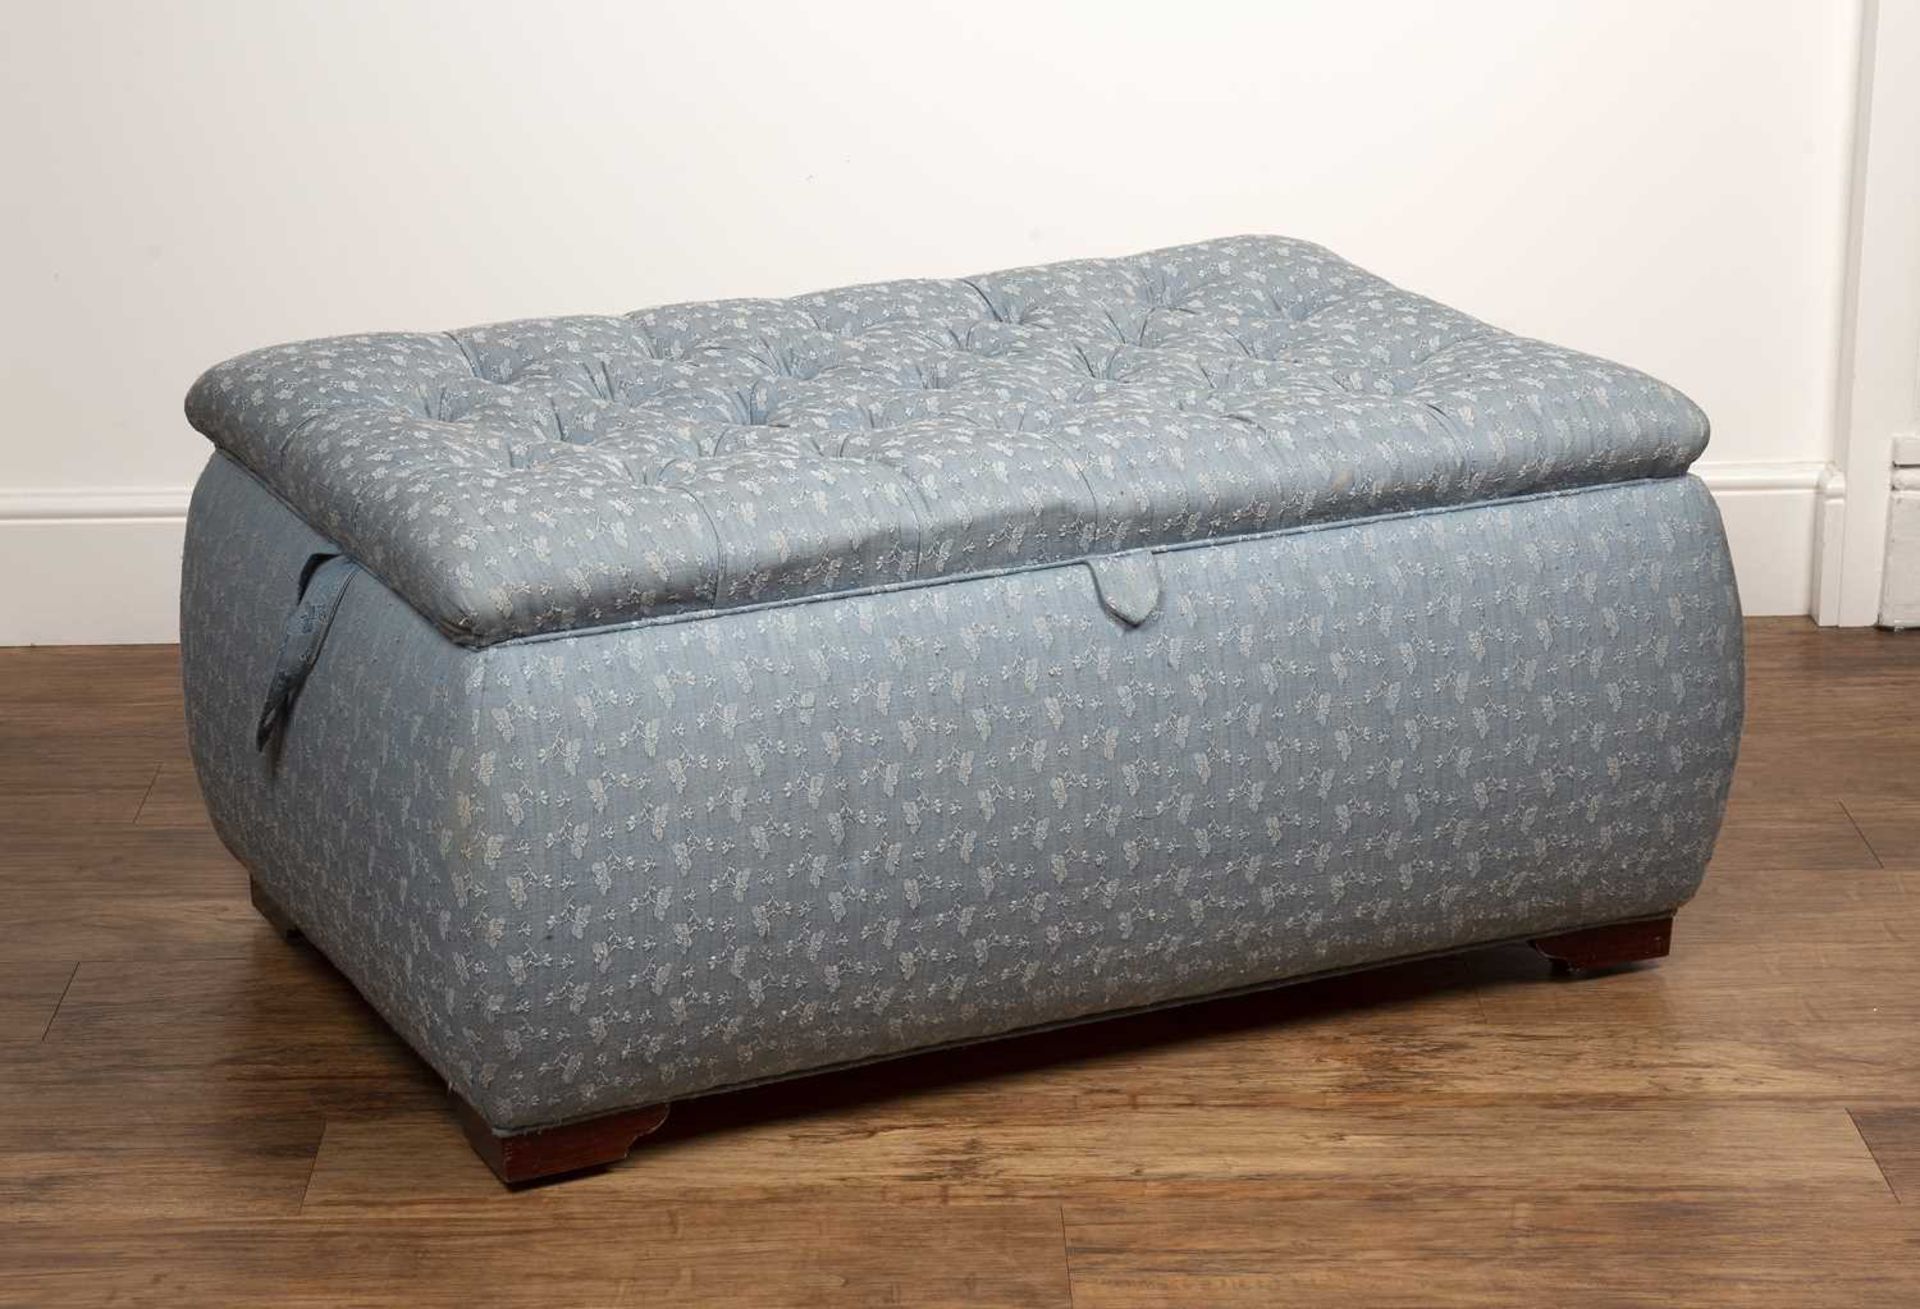 Large contemporary blue button upholstered ottoman with a lift up cover, 110cm wide x 72cm deep x - Image 3 of 5